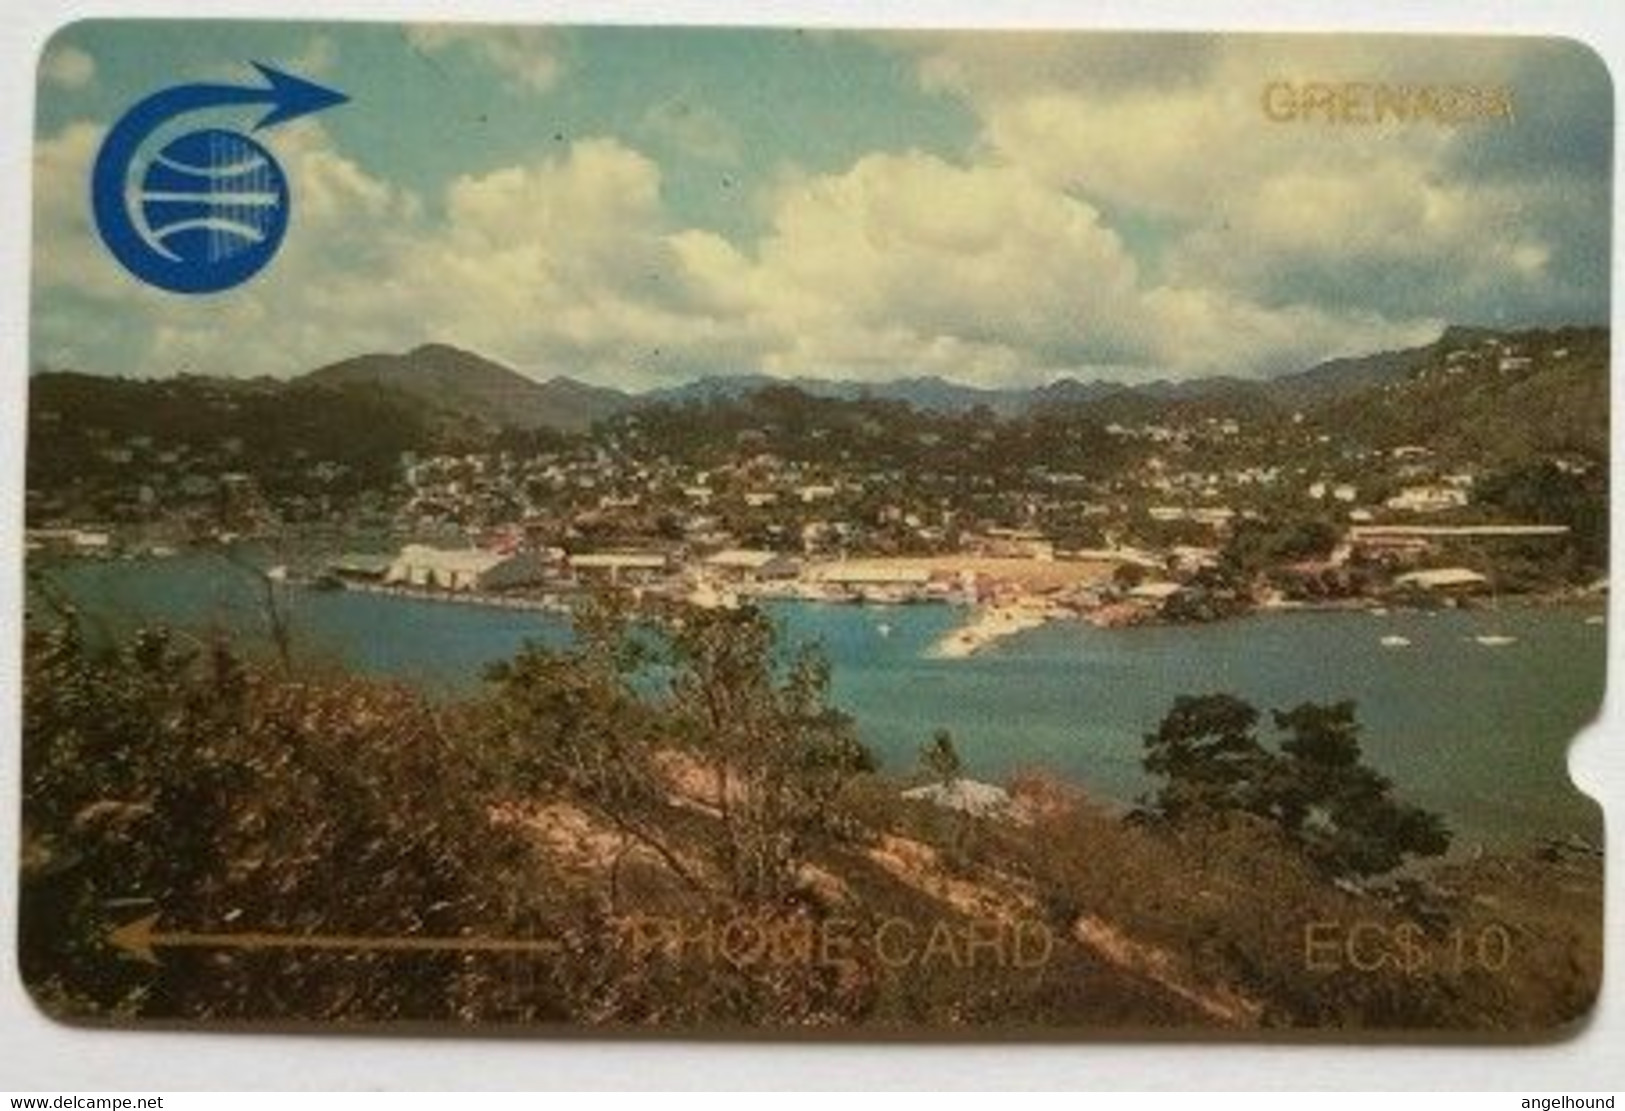 Grenada Cable And Wireless 1CGRB "St George EC$10 Deep Notch" - Grenade